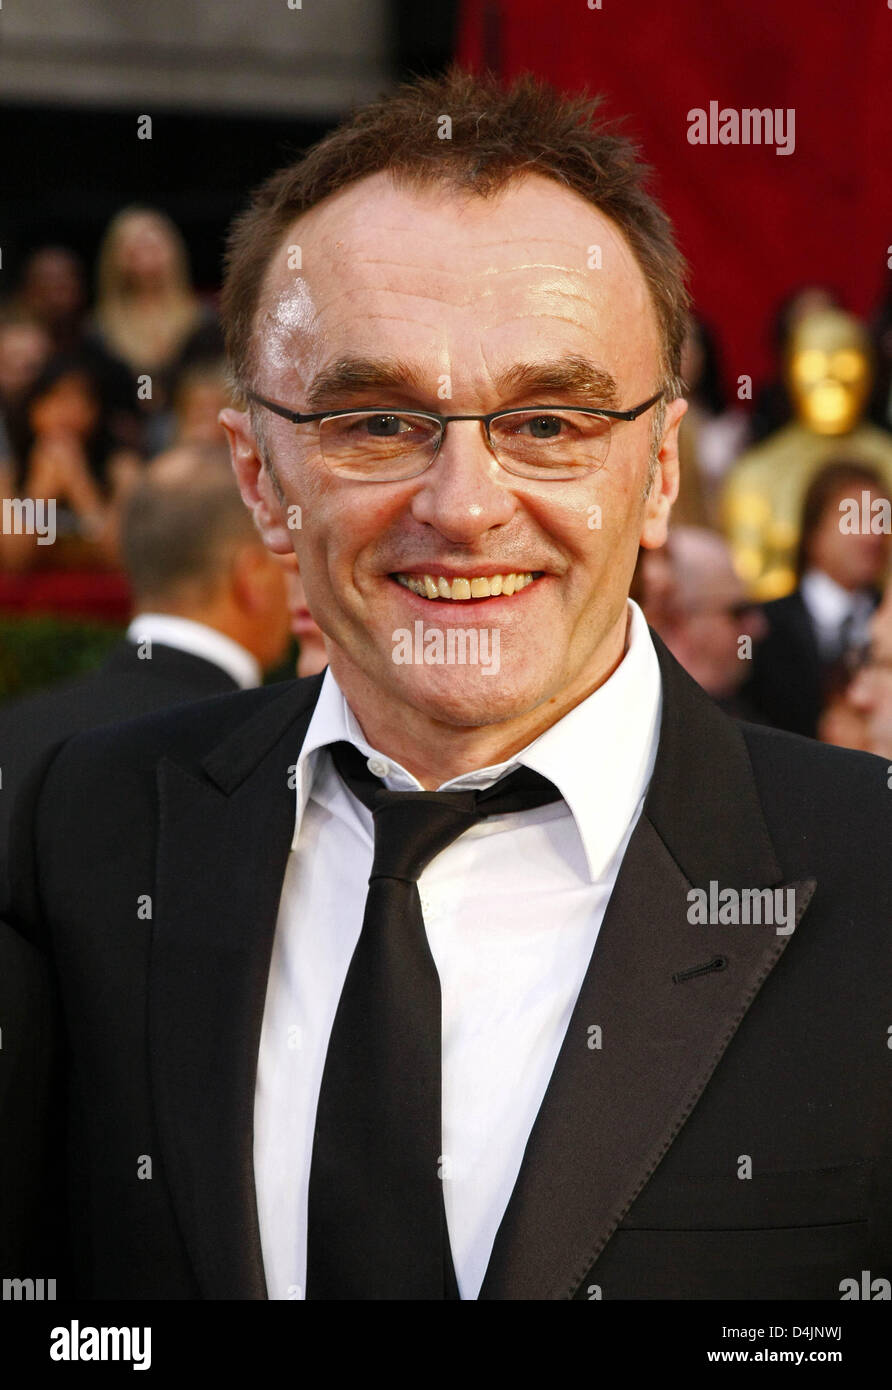 British director Danny Boyle arrives on the red carpet for the 81st Academy Awards at the Kodak Theatre in Hollywood, California, USA, 22 February 2009. Boyle won the Oscar as best director for his film ?Slumdog Millionaire?. The Academy Awards, popularly known as the Oscars, honour excellence in cinema. Photo: Hubert Boesl Stock Photo